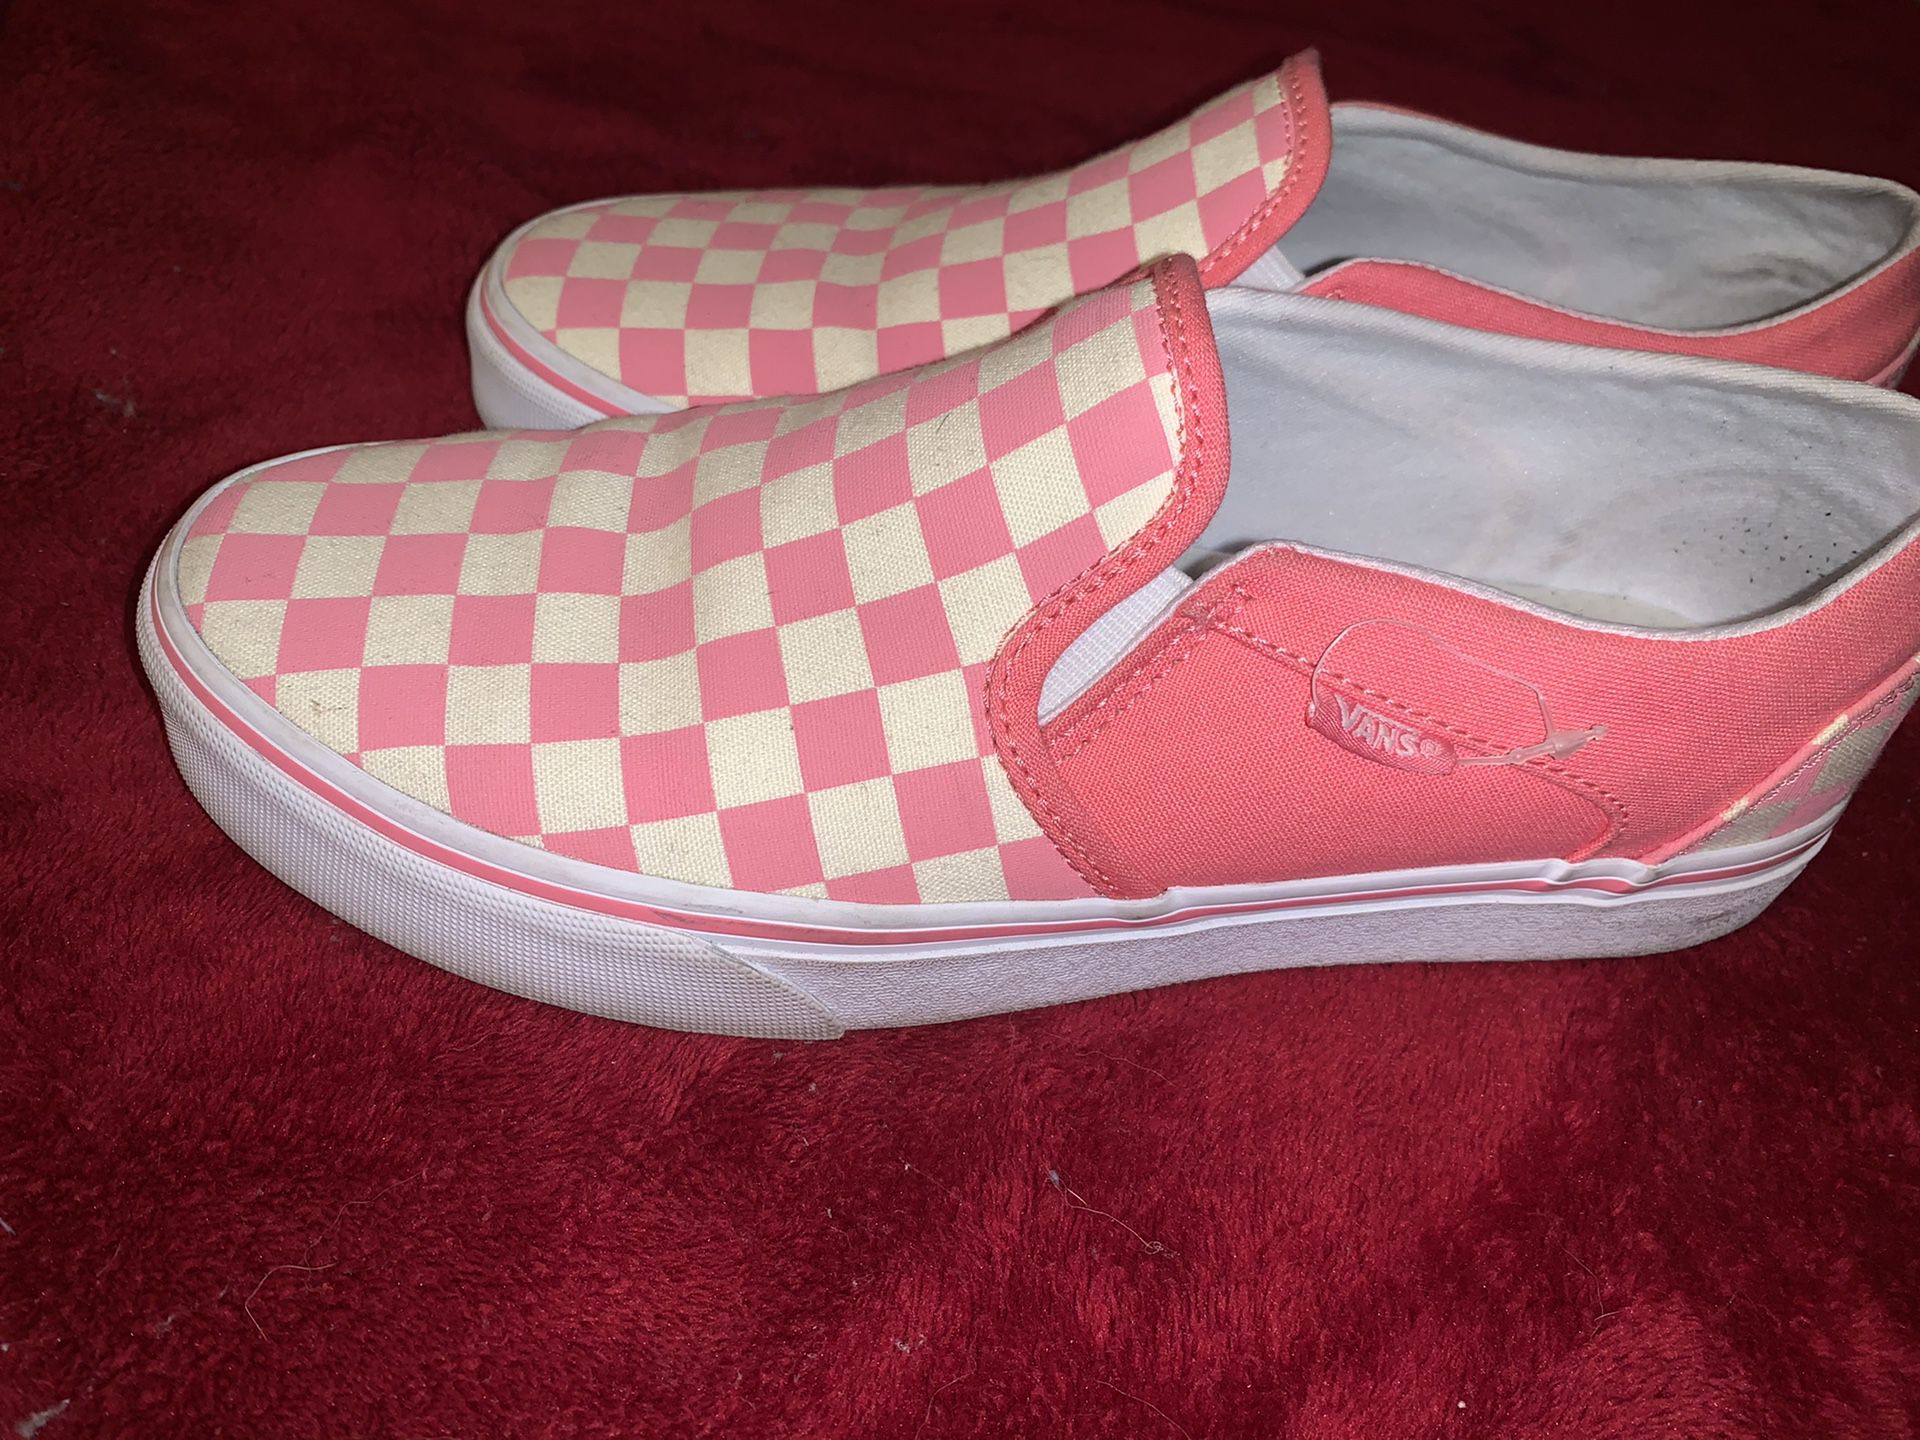 Pink and white checkered Van’s Women’s size 9.